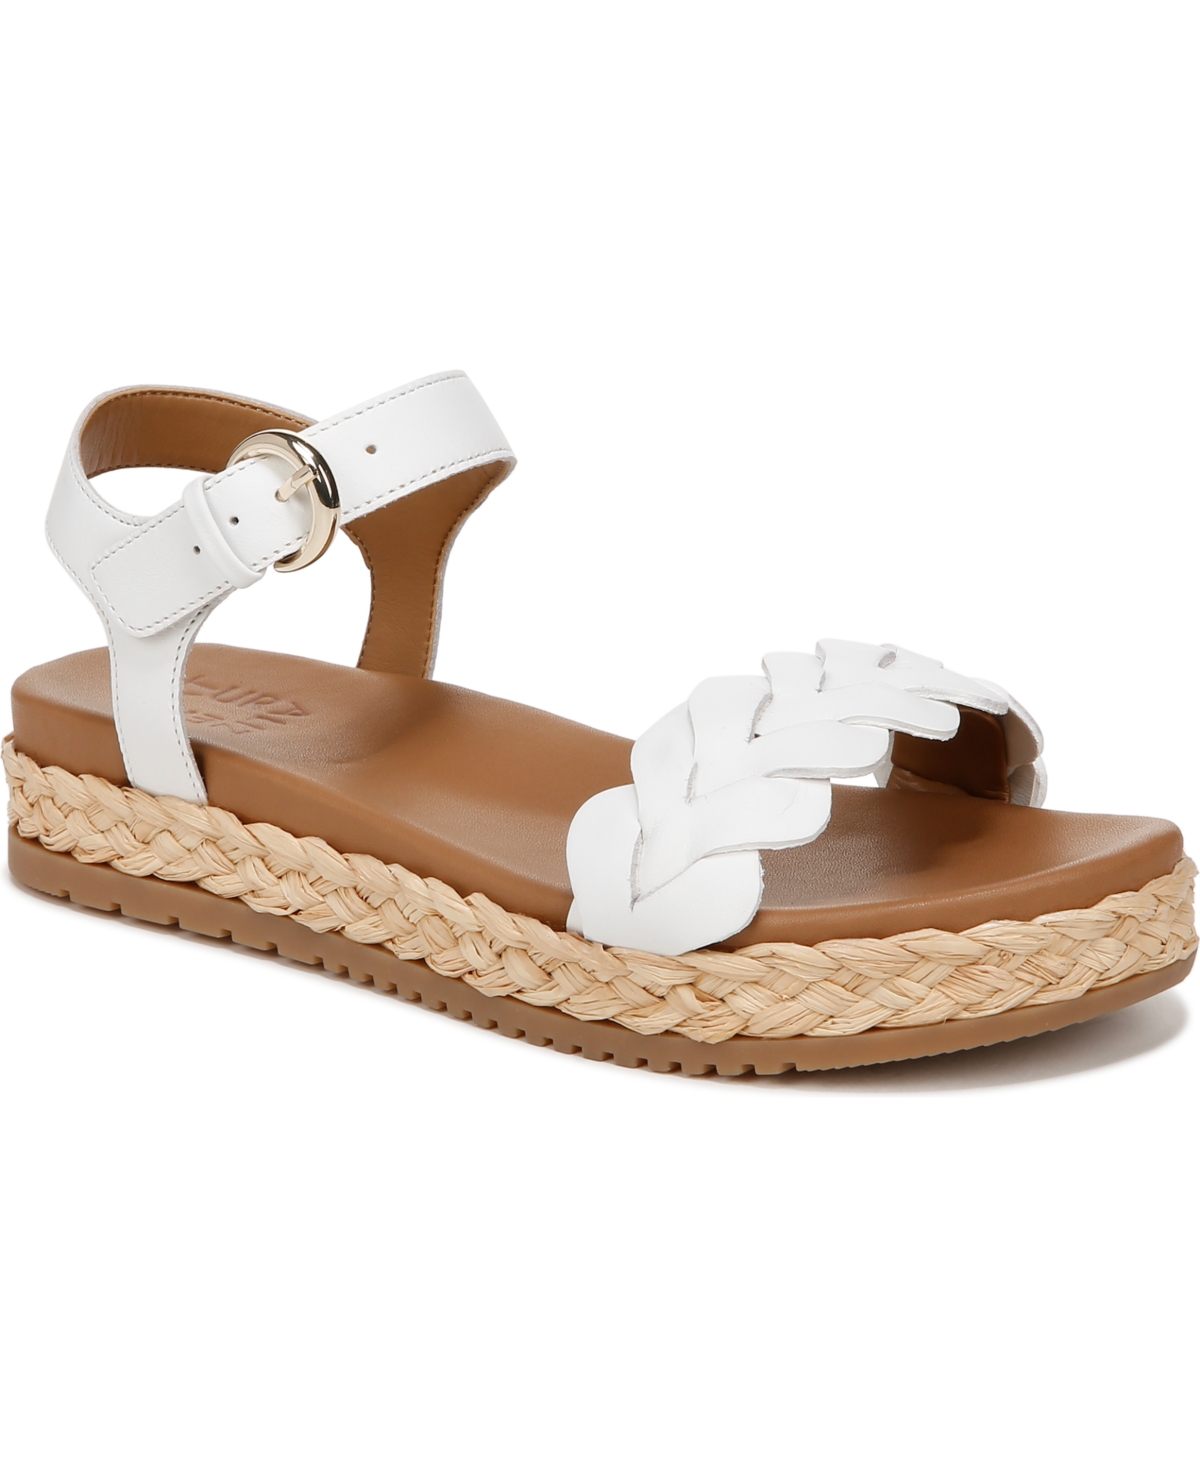 Naturalizer Neila Flatform Sandals In White Leather